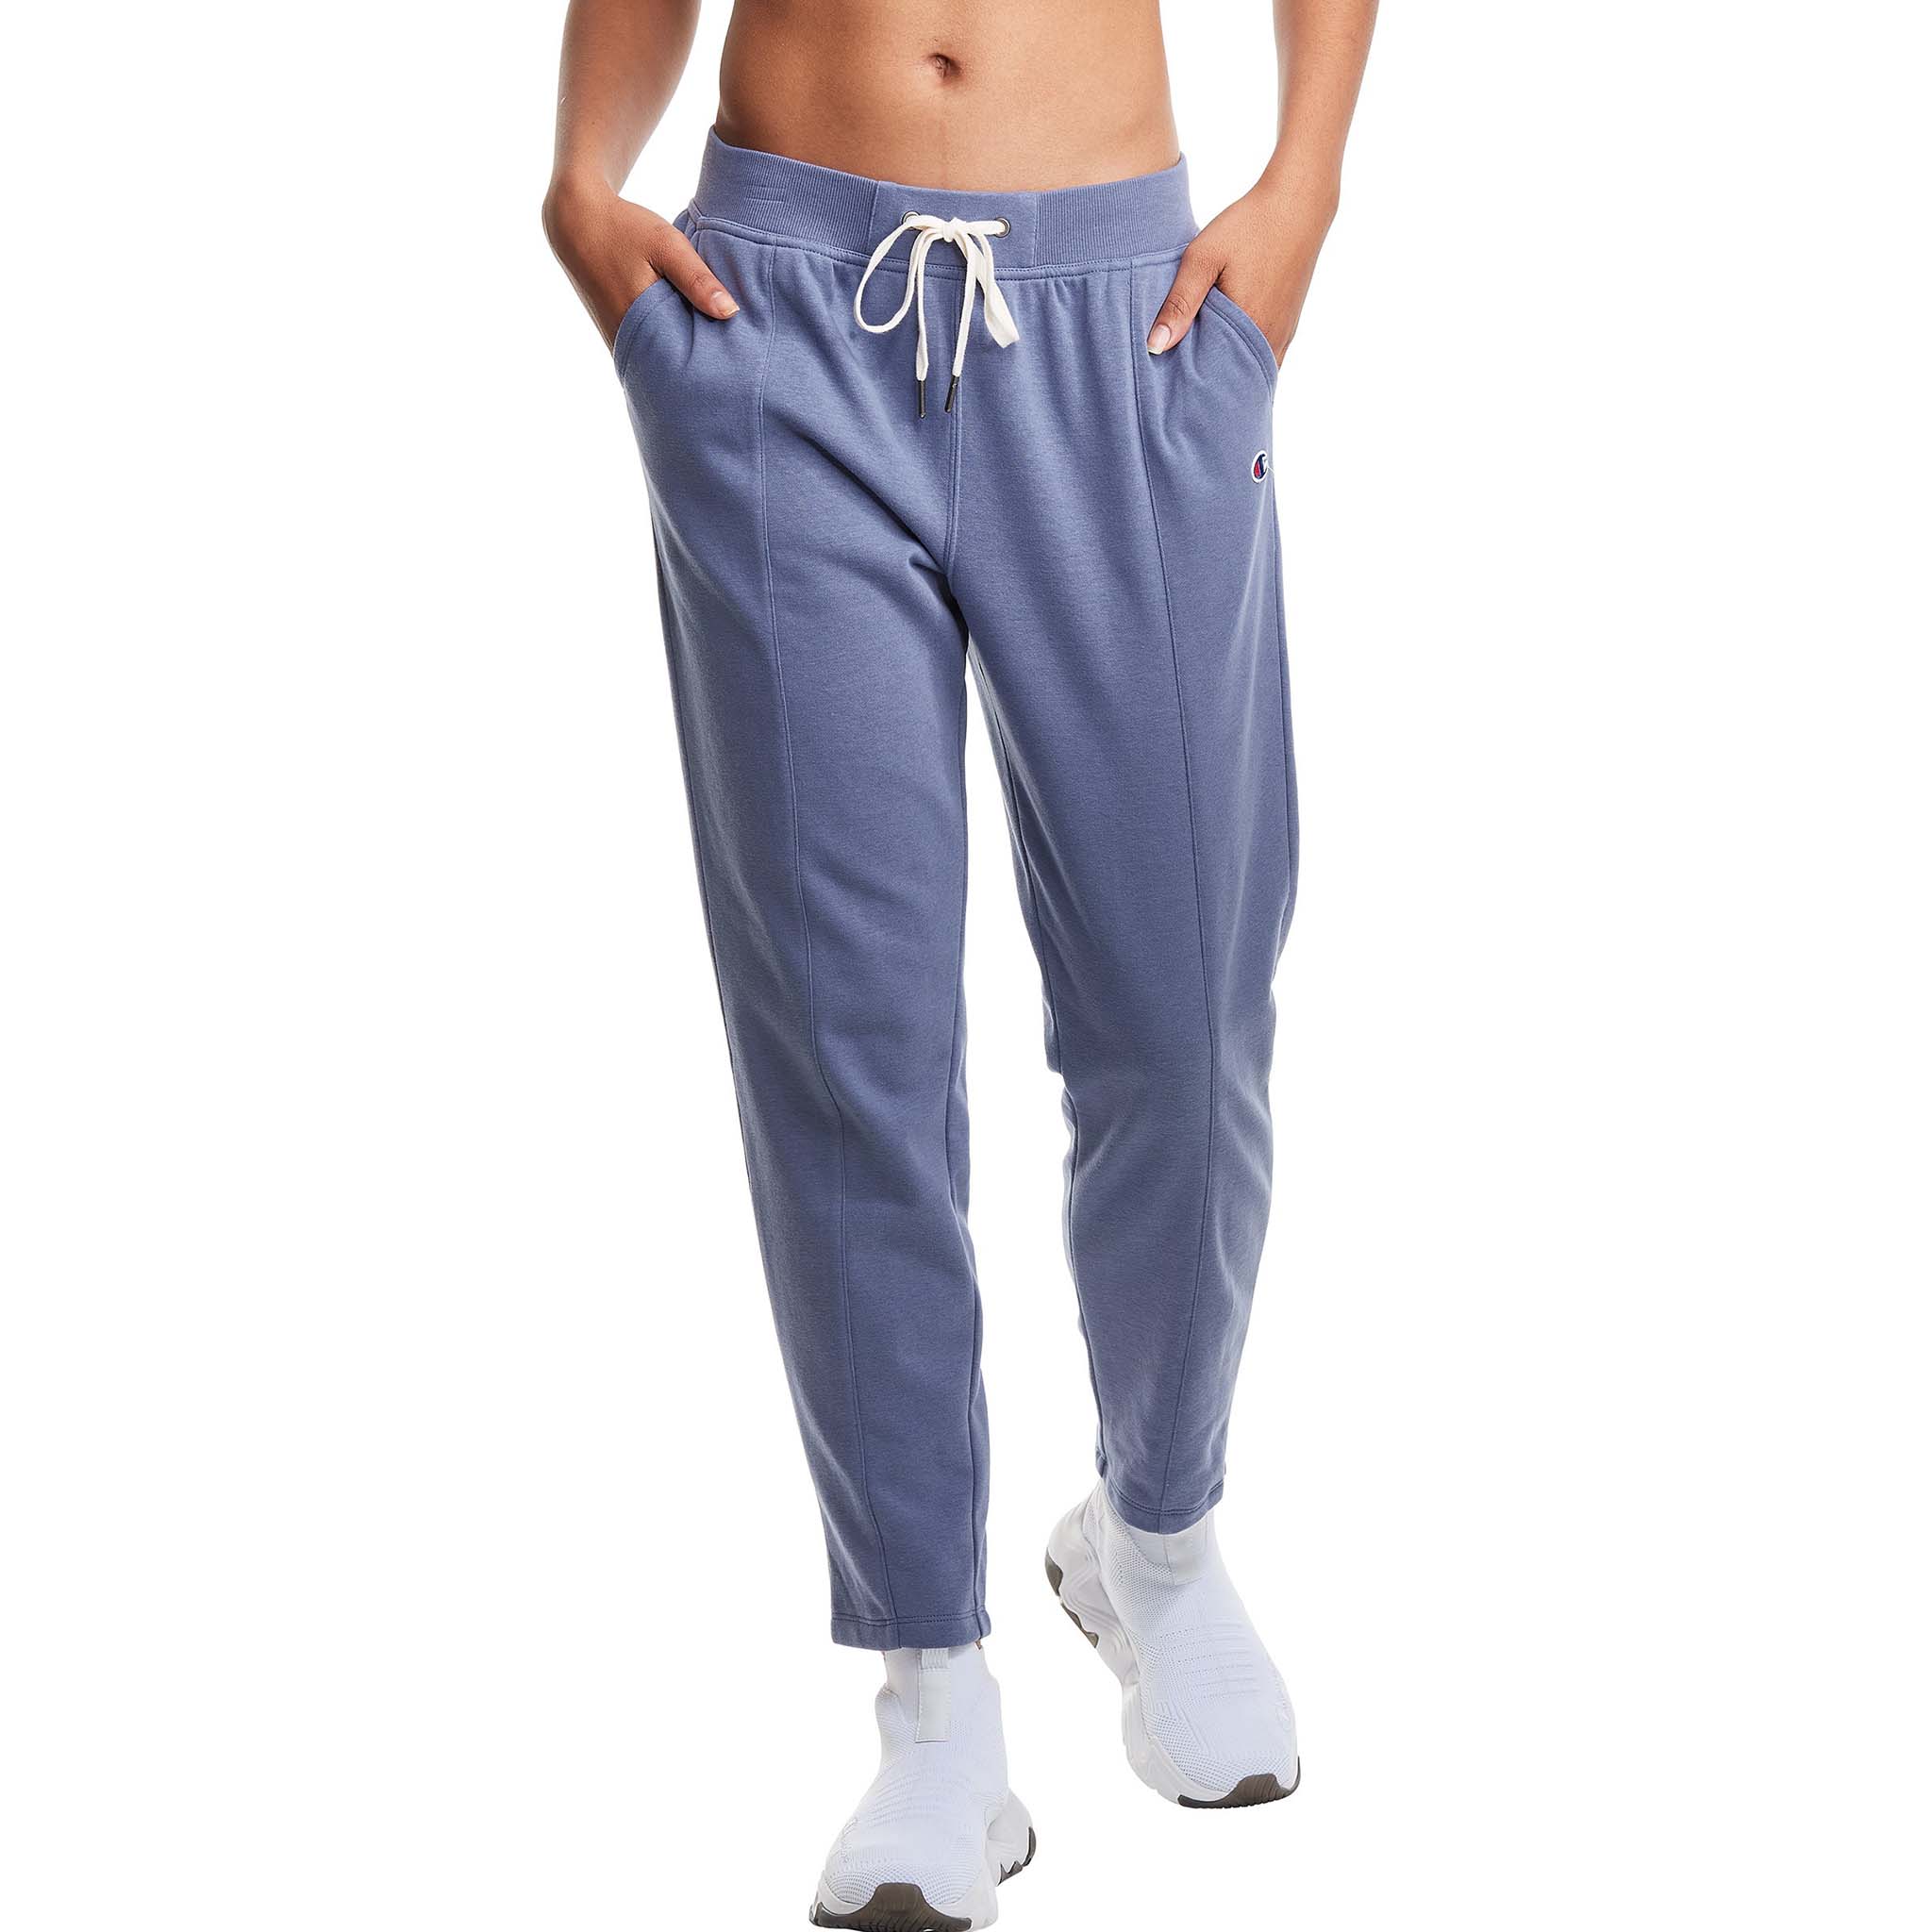 Champion Campus French Terry Sweatpants for women – Soccer Sport Fitness